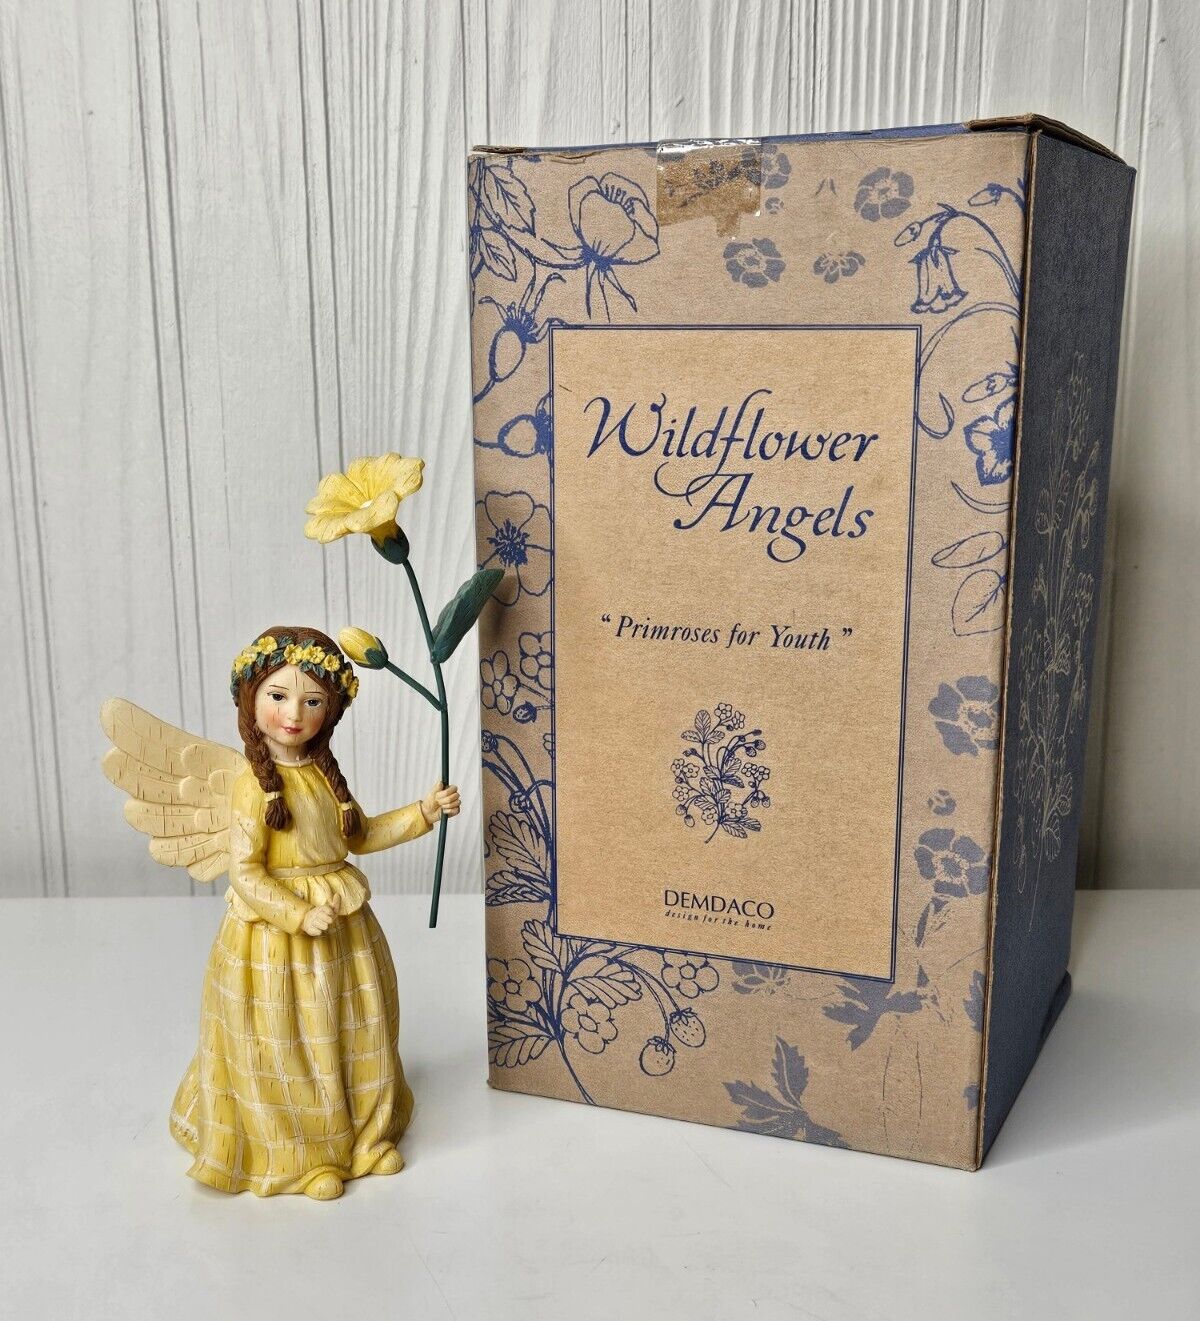 Wildflower Angels Primroses for Youth Figurine 36018 Demdaco 6.5” Tall in Box